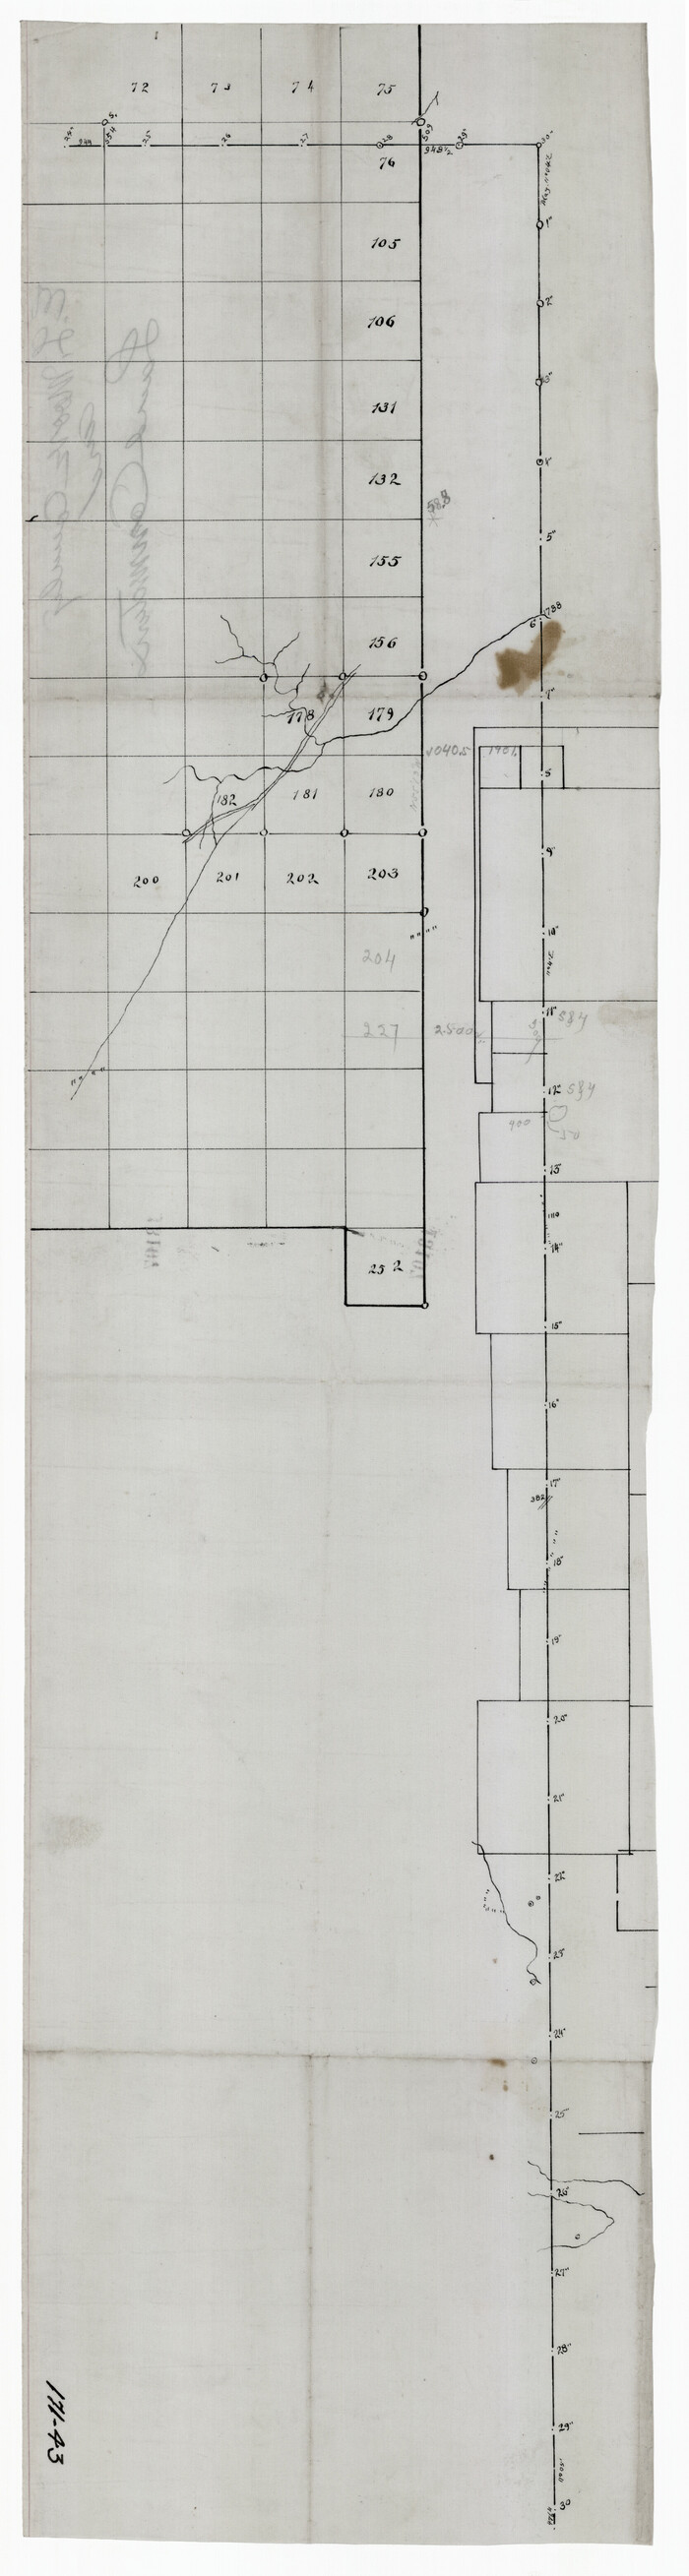 91517, [Northeast Portion of Moore County], Twichell Survey Records